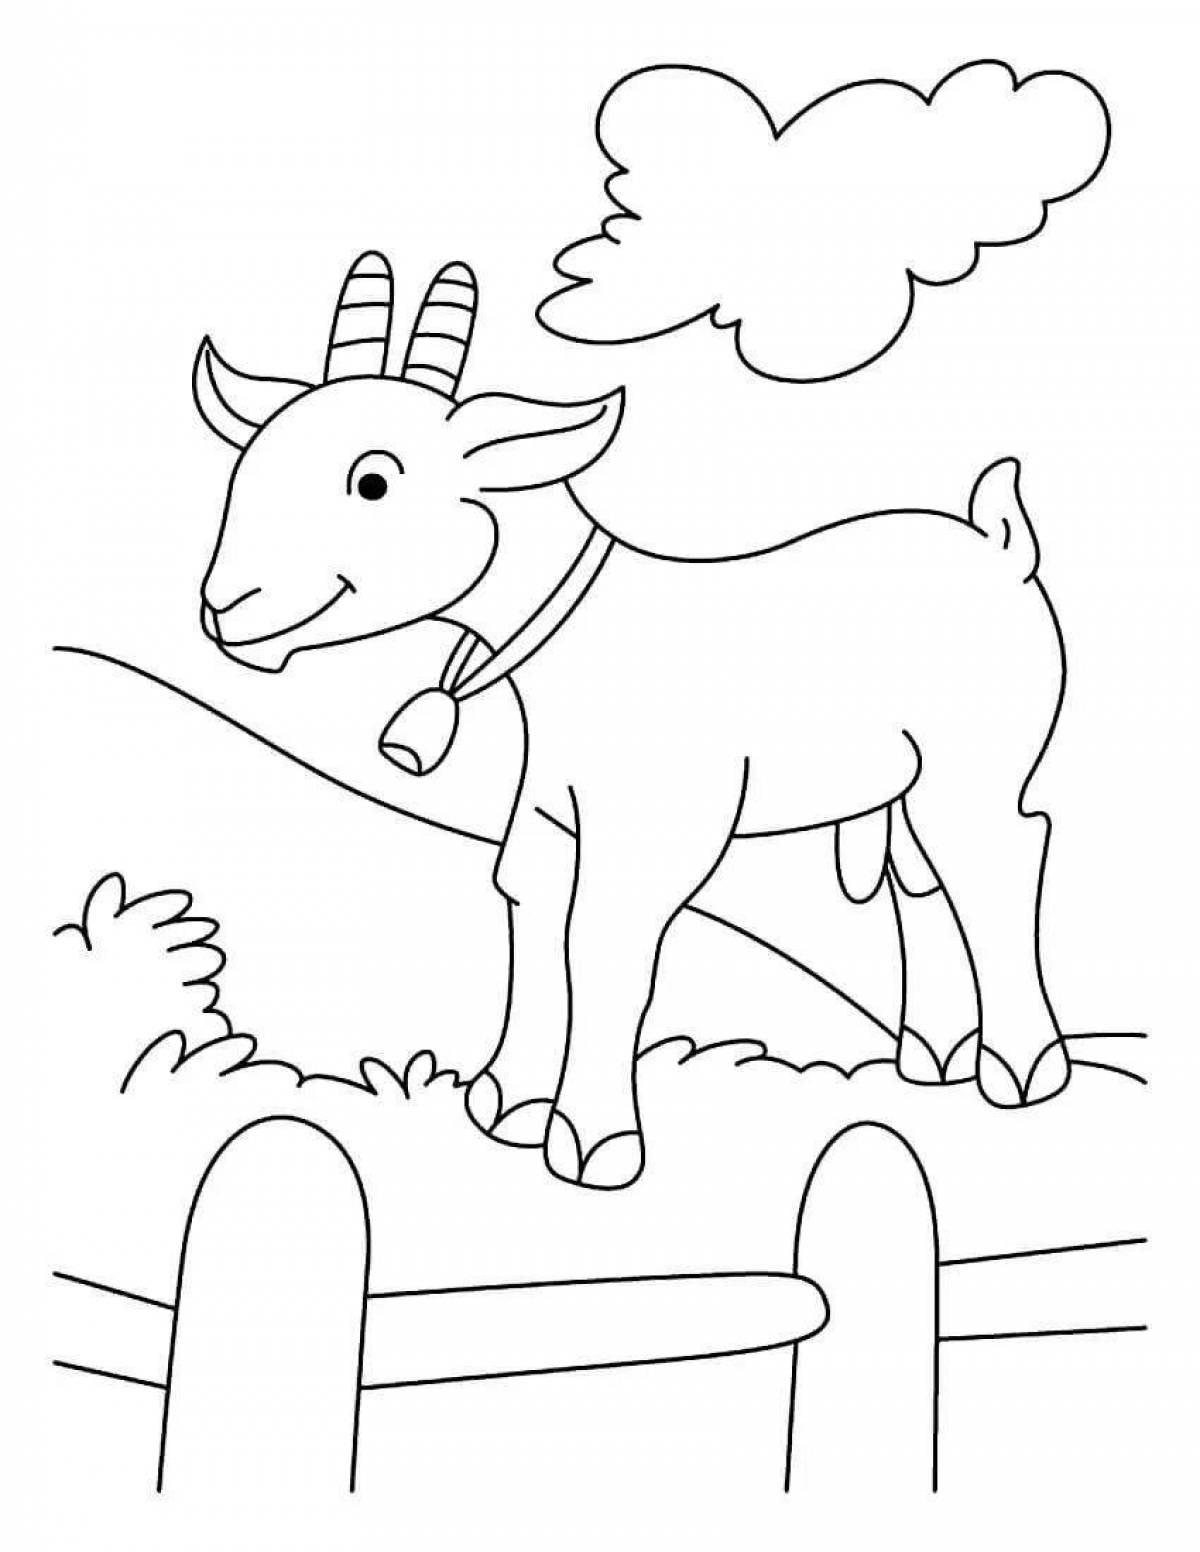 Humorous goat coloring book for kids